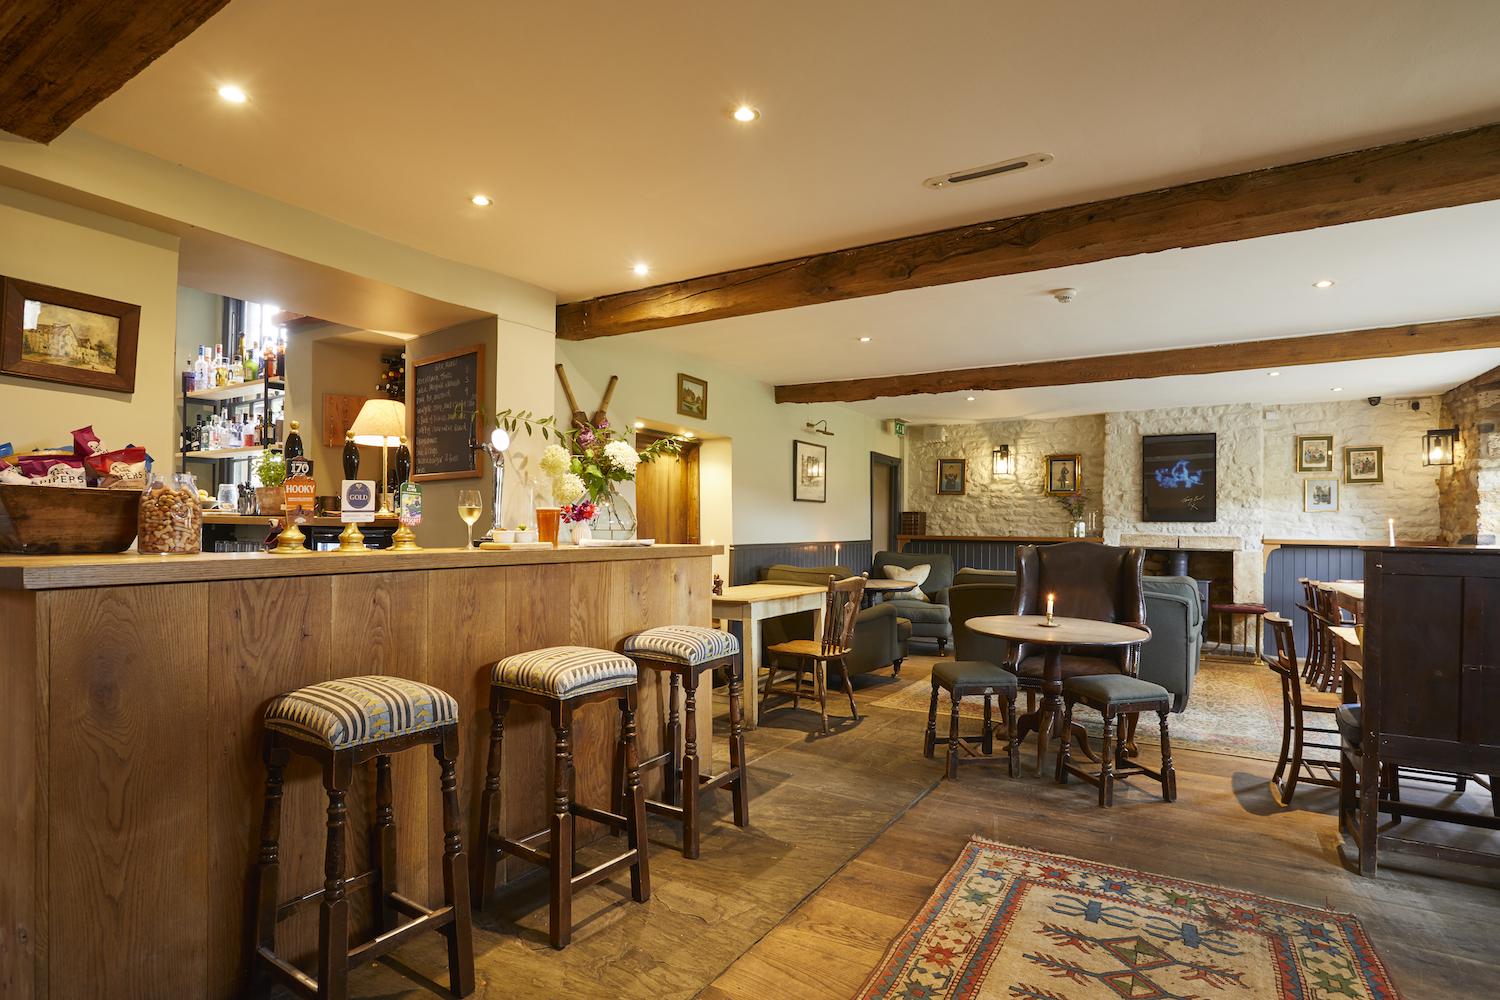 Hotels in Chipping Norton holidays at Cool Places